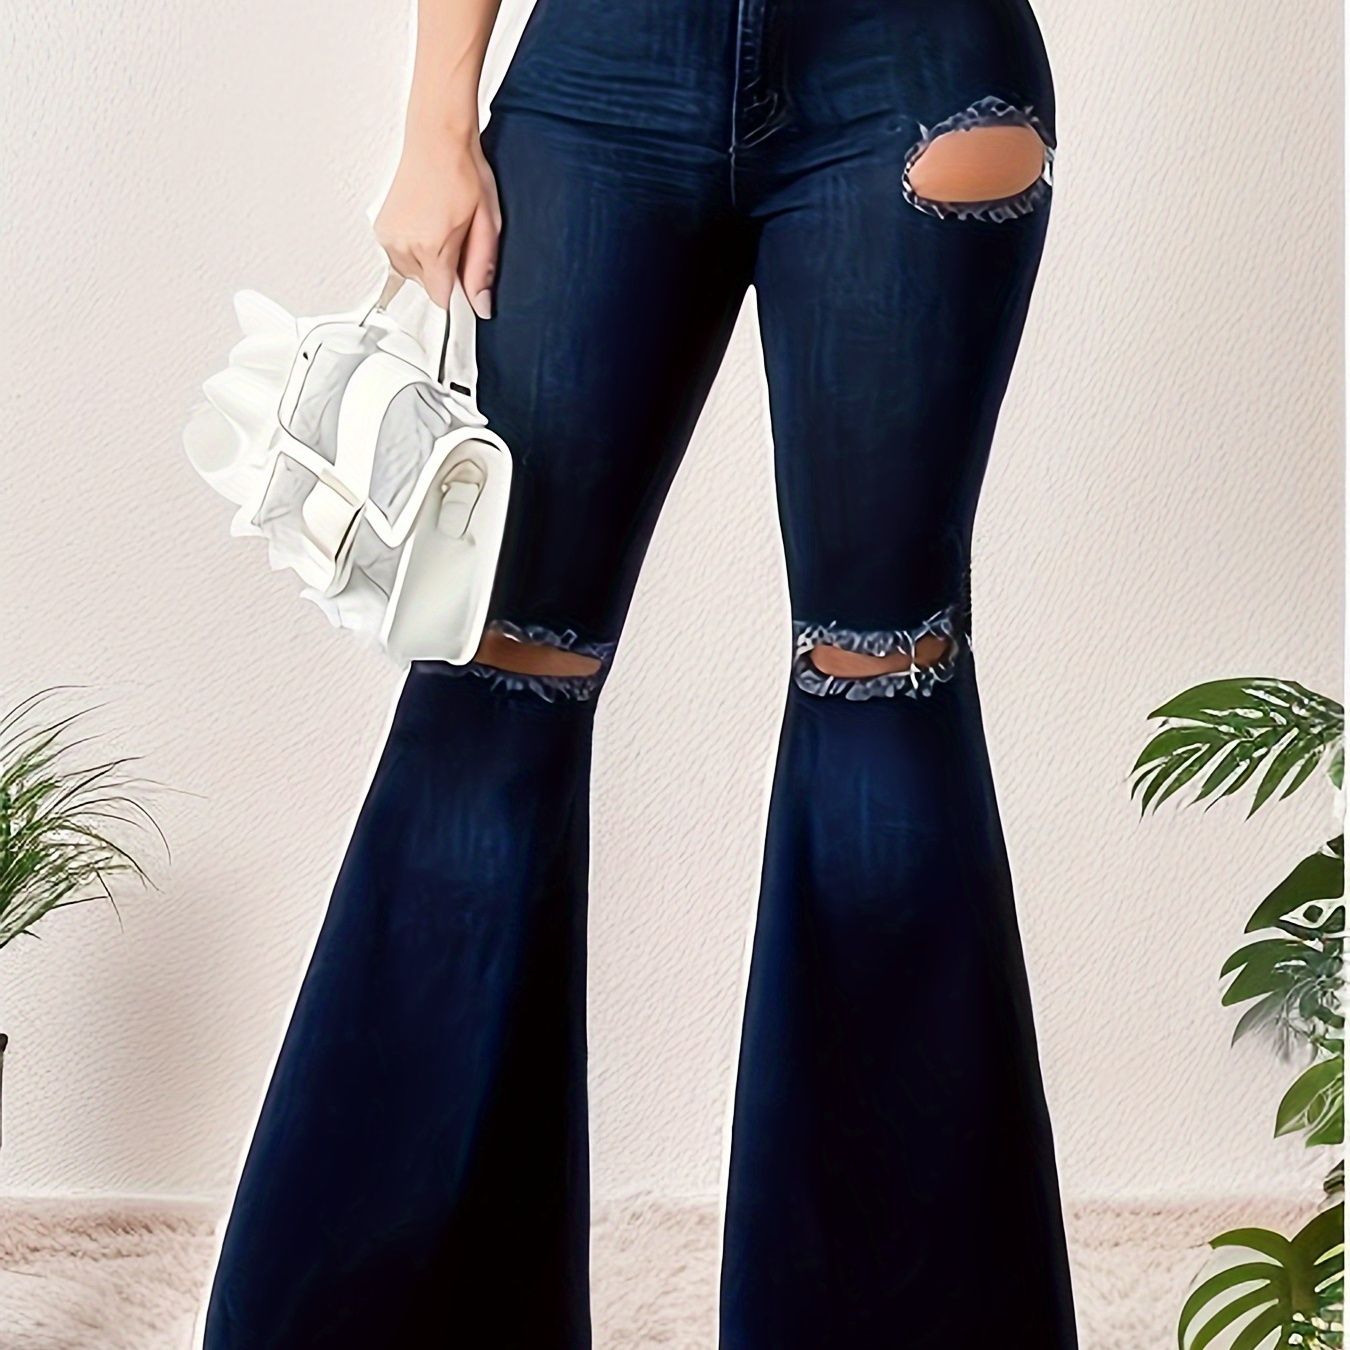 

Women's Sexy High Waist Stretchy Ripped Raw Hem Flare Leg Jeans, Fashion Bell Bottom Denim Pants, Stylish Ladies Casual Distressed Long Trousers